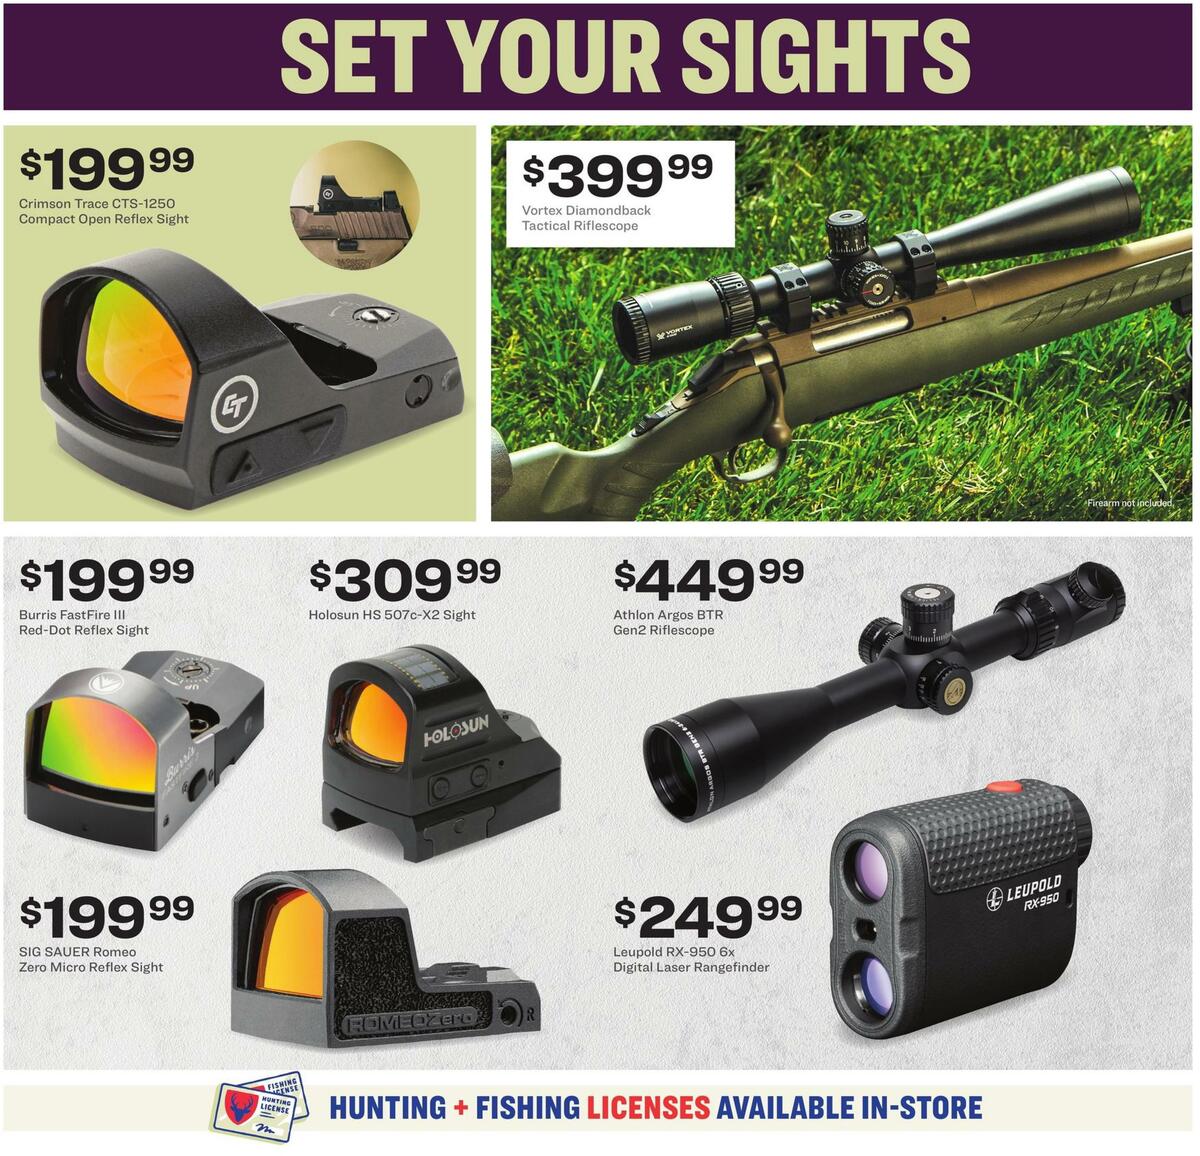 Academy Sports + Outdoors Weekly Ad from May 3